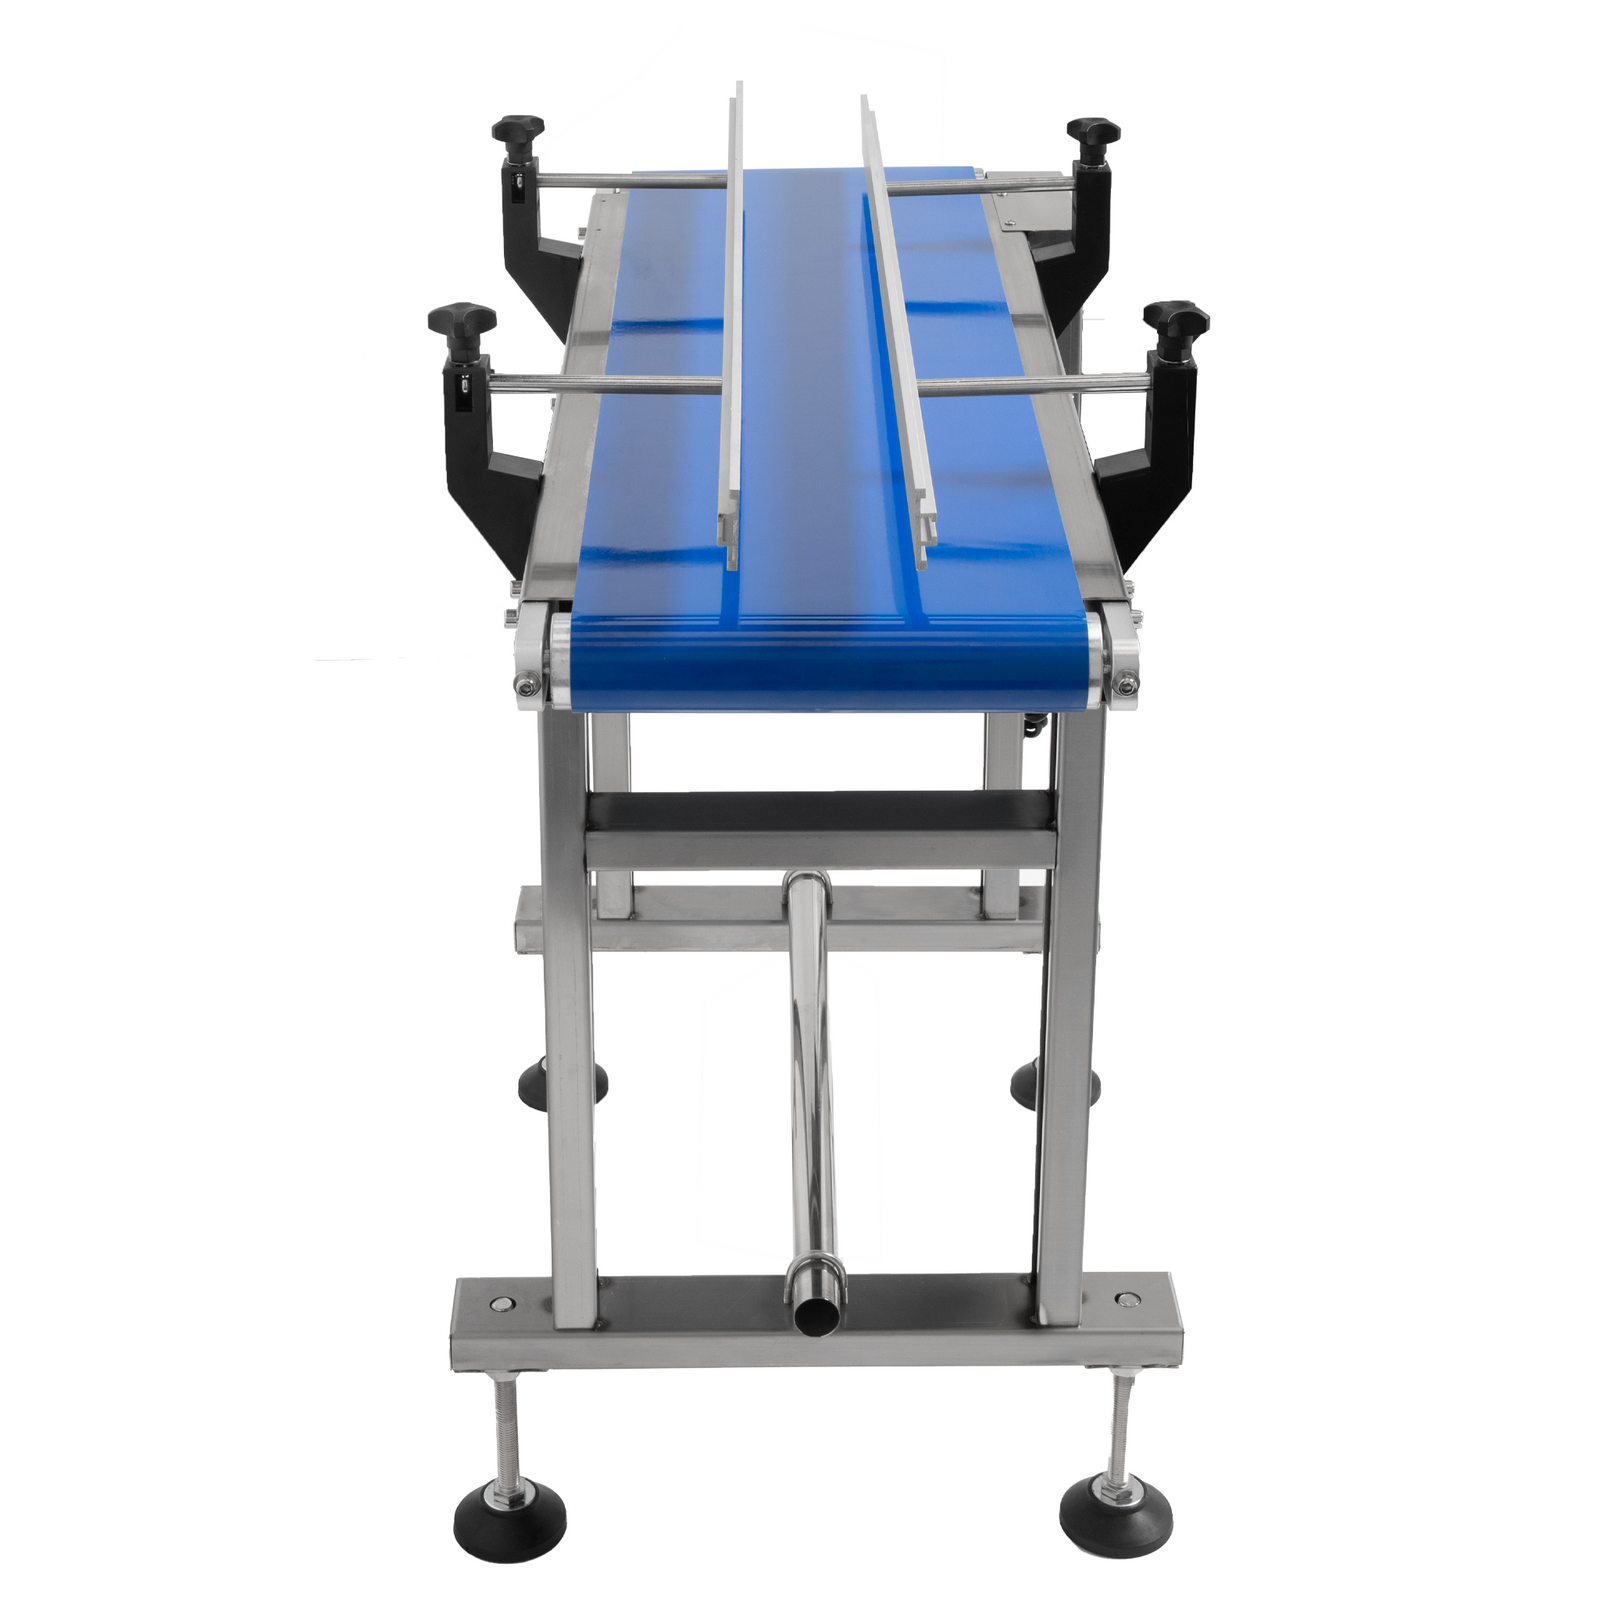 motorized conveyor with steel frame and blue belt that features side guard rails contracted